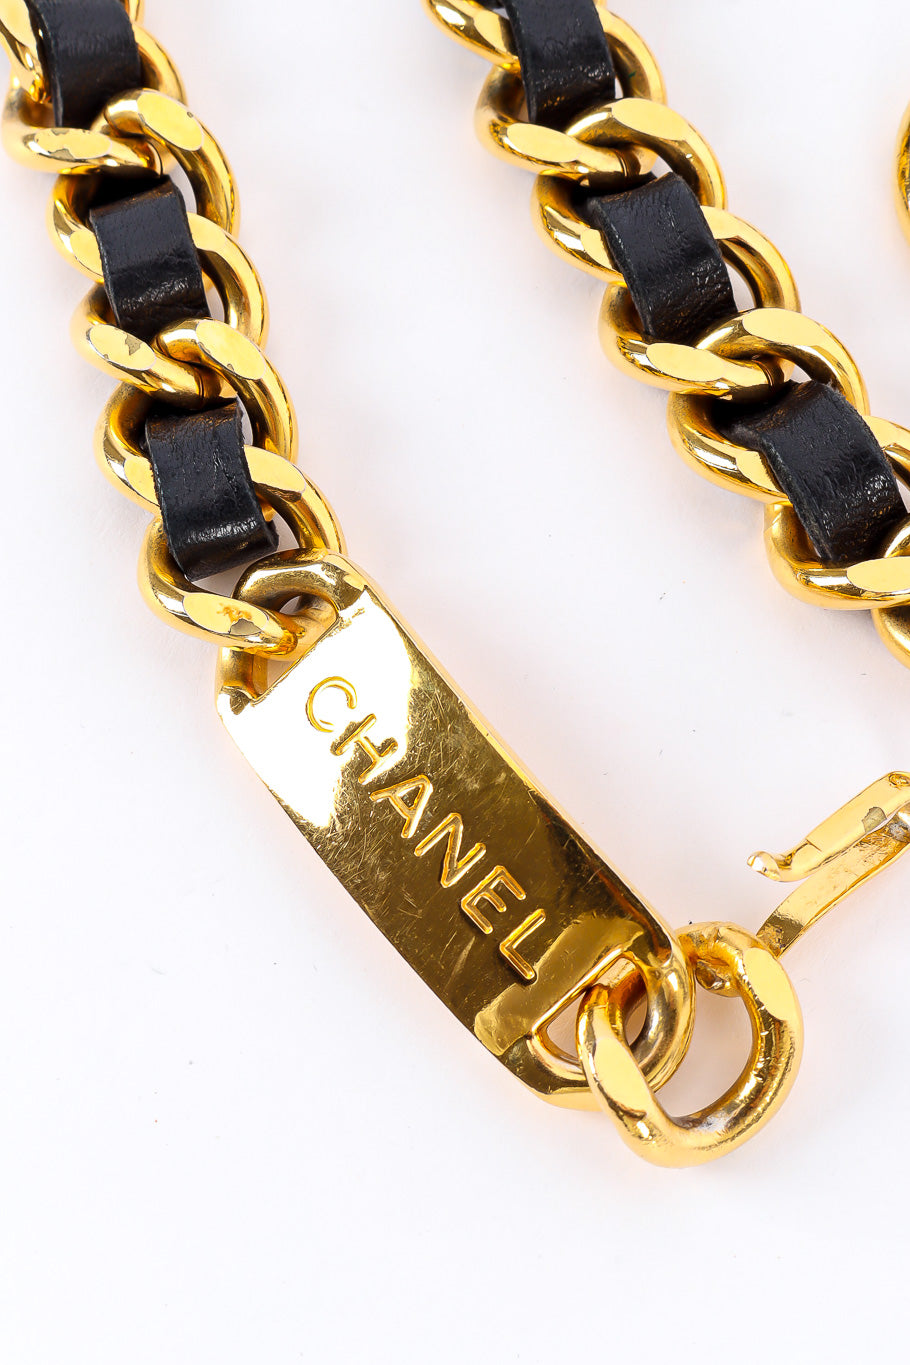 Iconic vintage coin belt by Chanel Plaque Photo @recessla